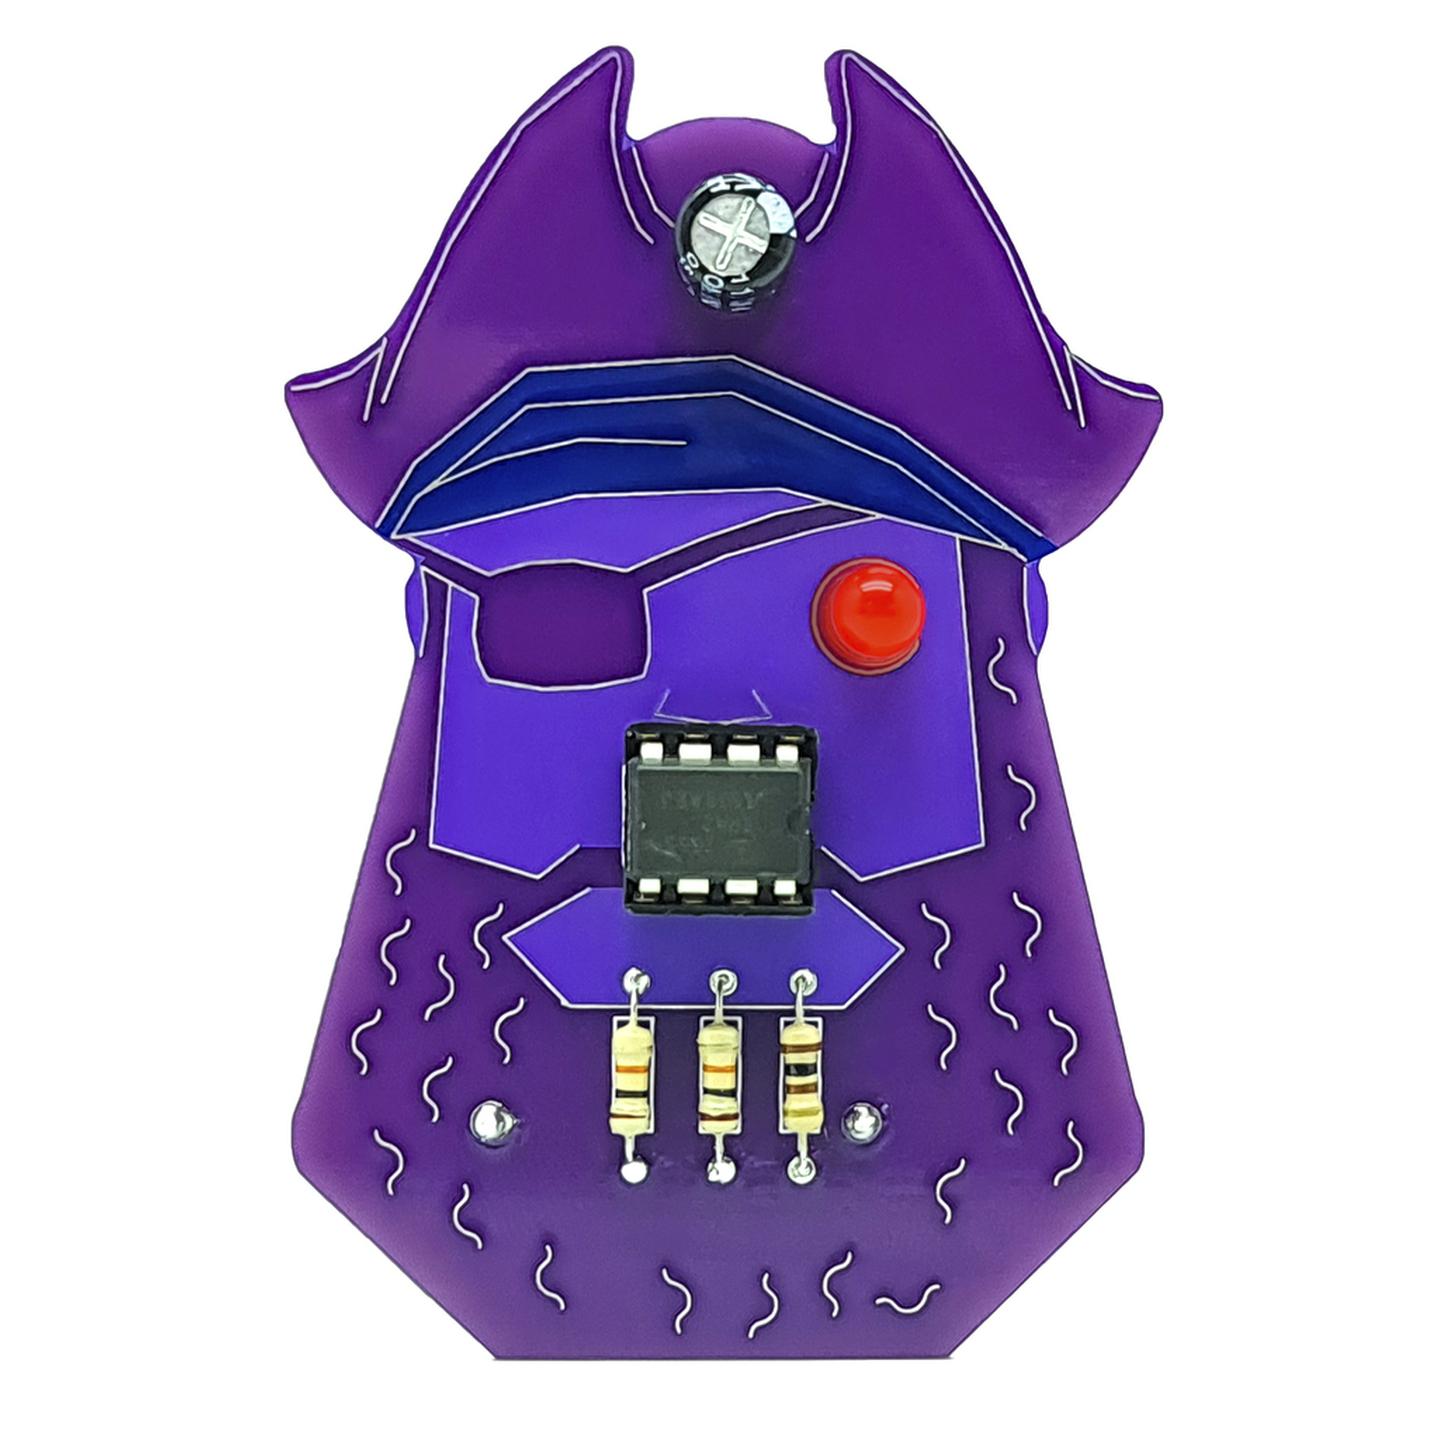 Build a Pirate Badge with Flashing LEDs - Learn to Solder Kit